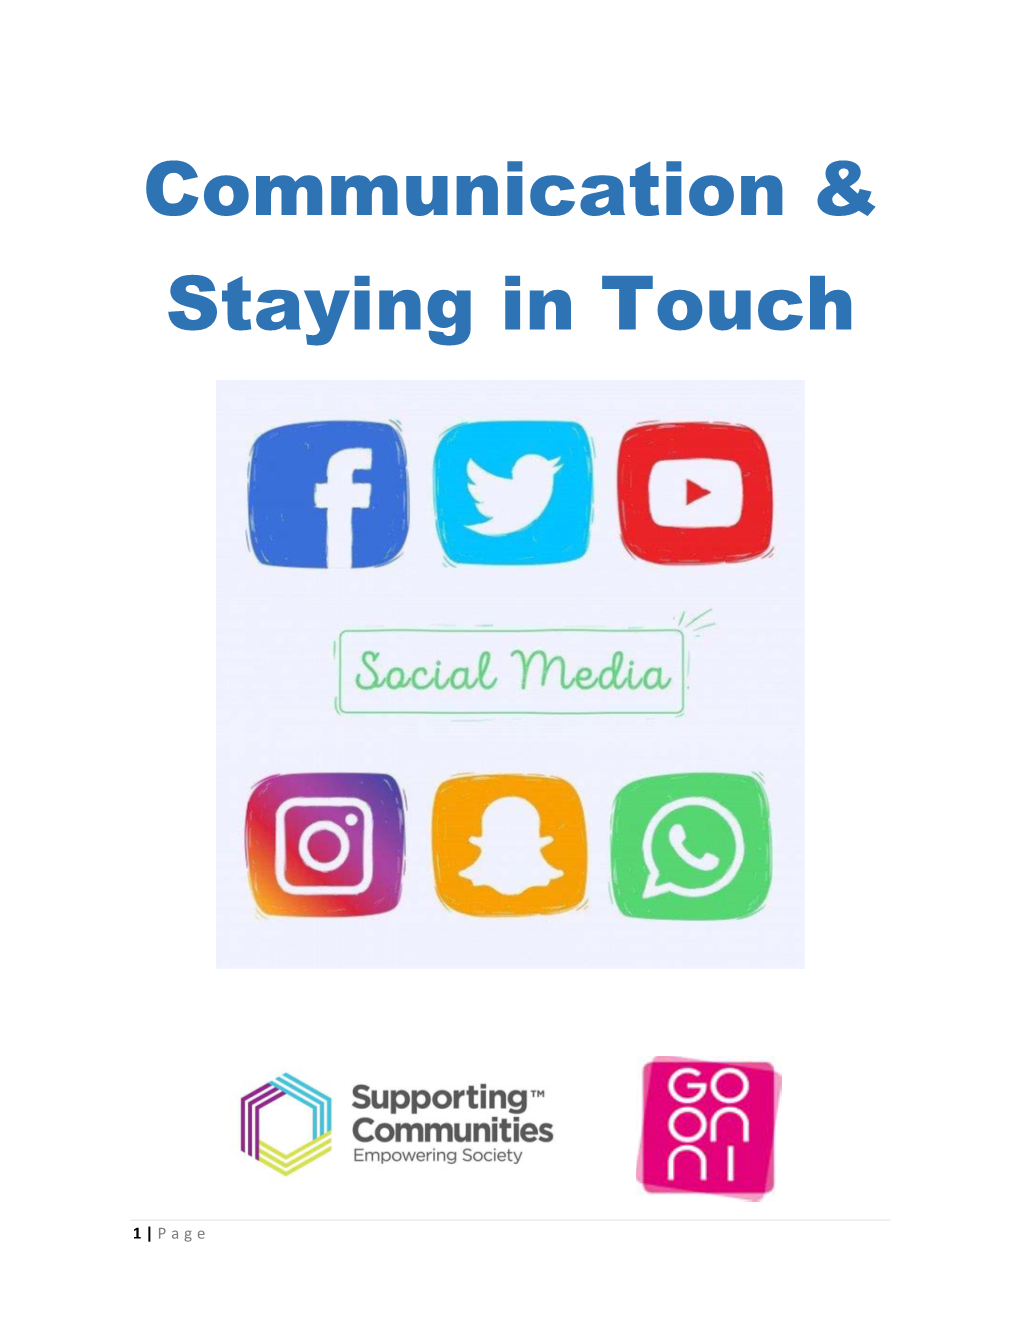 Communicating and Staying in Touch